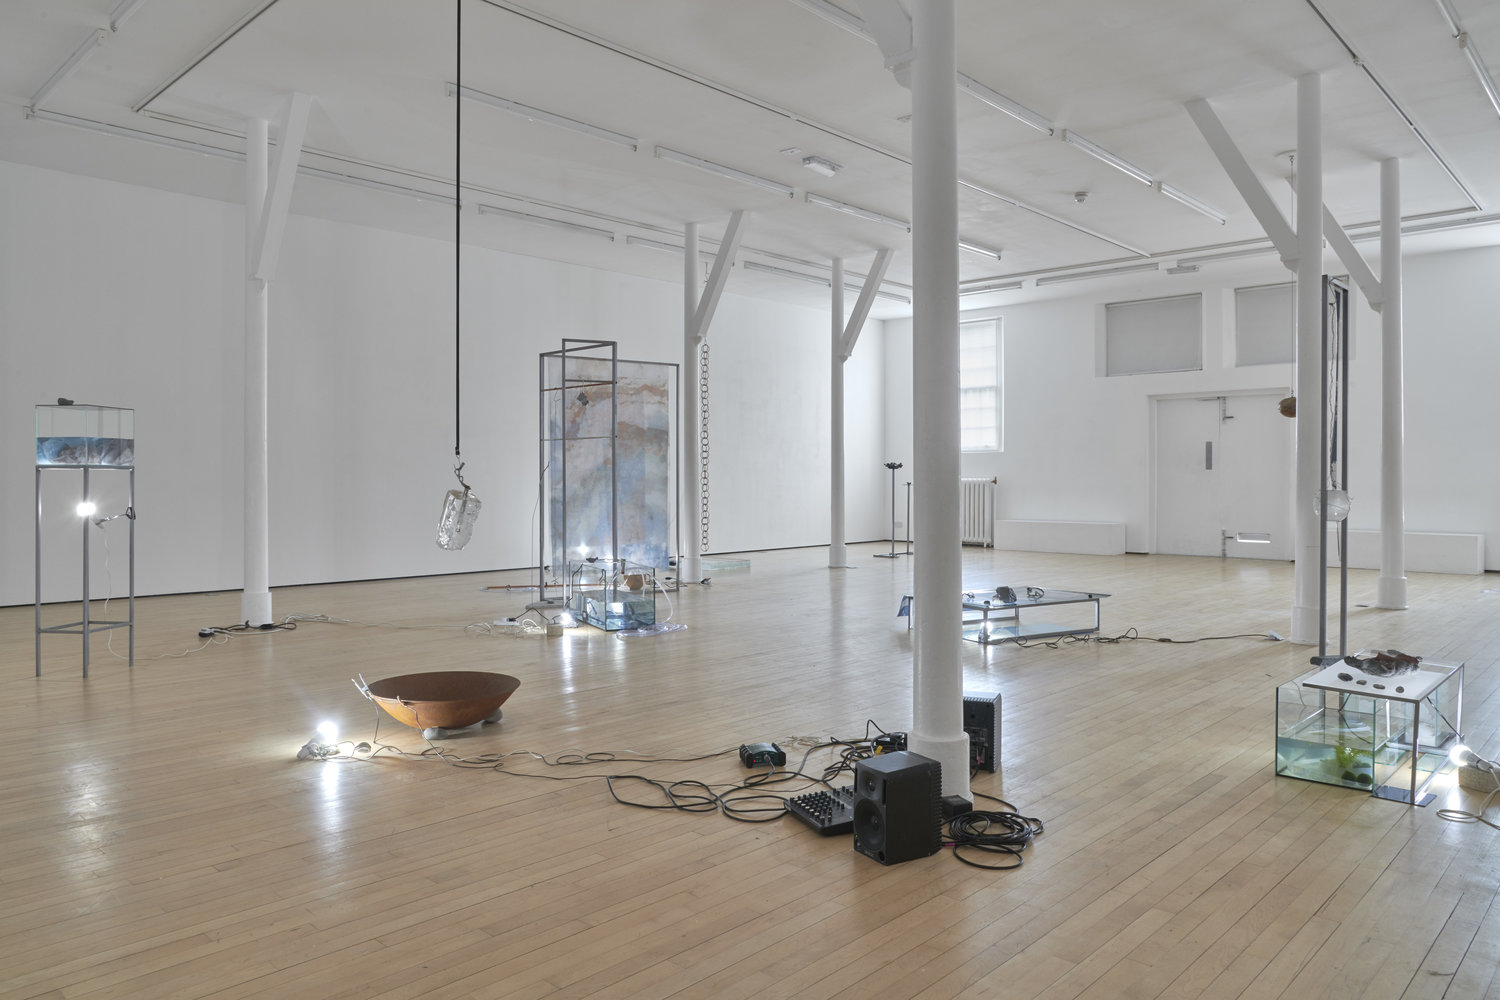 Hannah Rowan, Prima Materia, 2019, installation view of solo show at Assembly Point, London, UK. Photo credit: Assembly Point, Hannah Rowan.